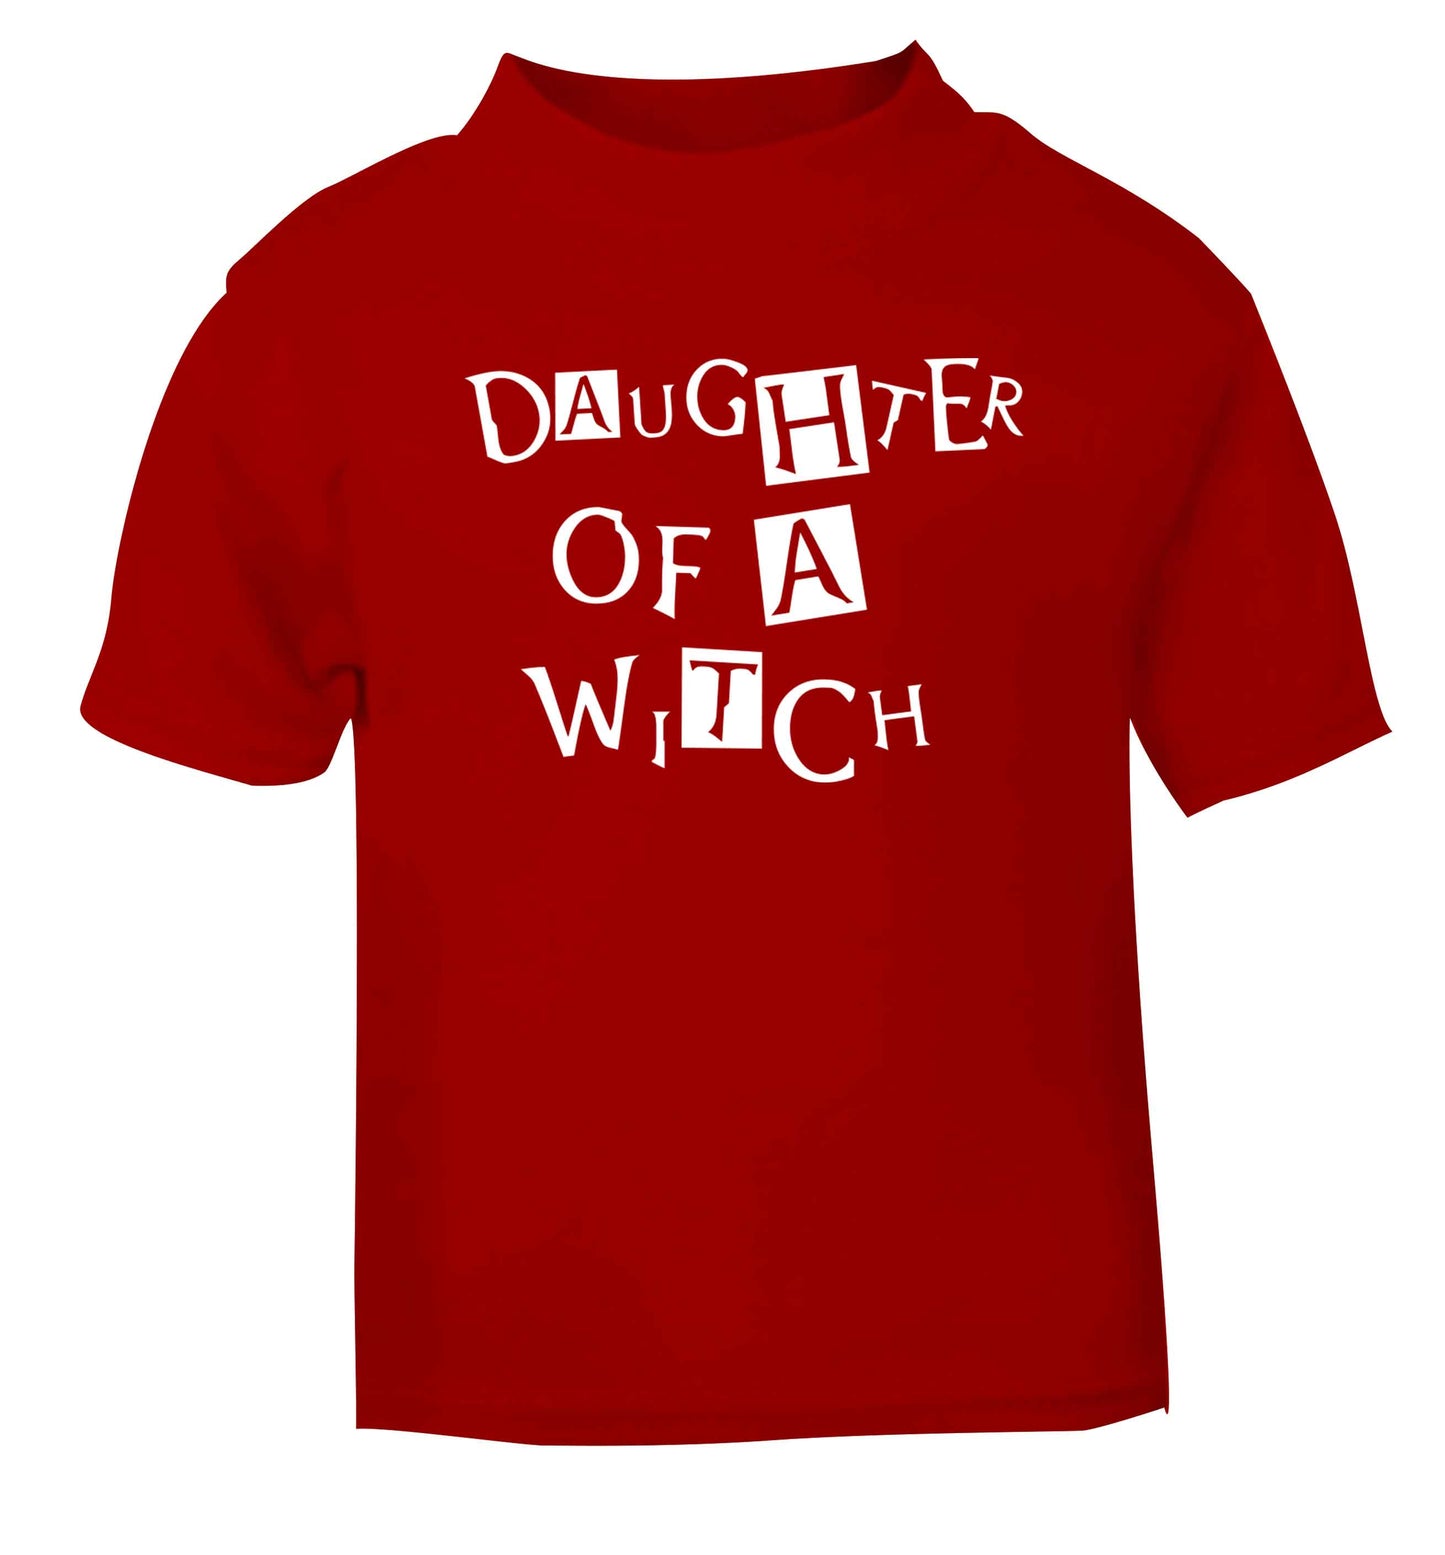 Daughter of a witch red baby toddler Tshirt 2 Years